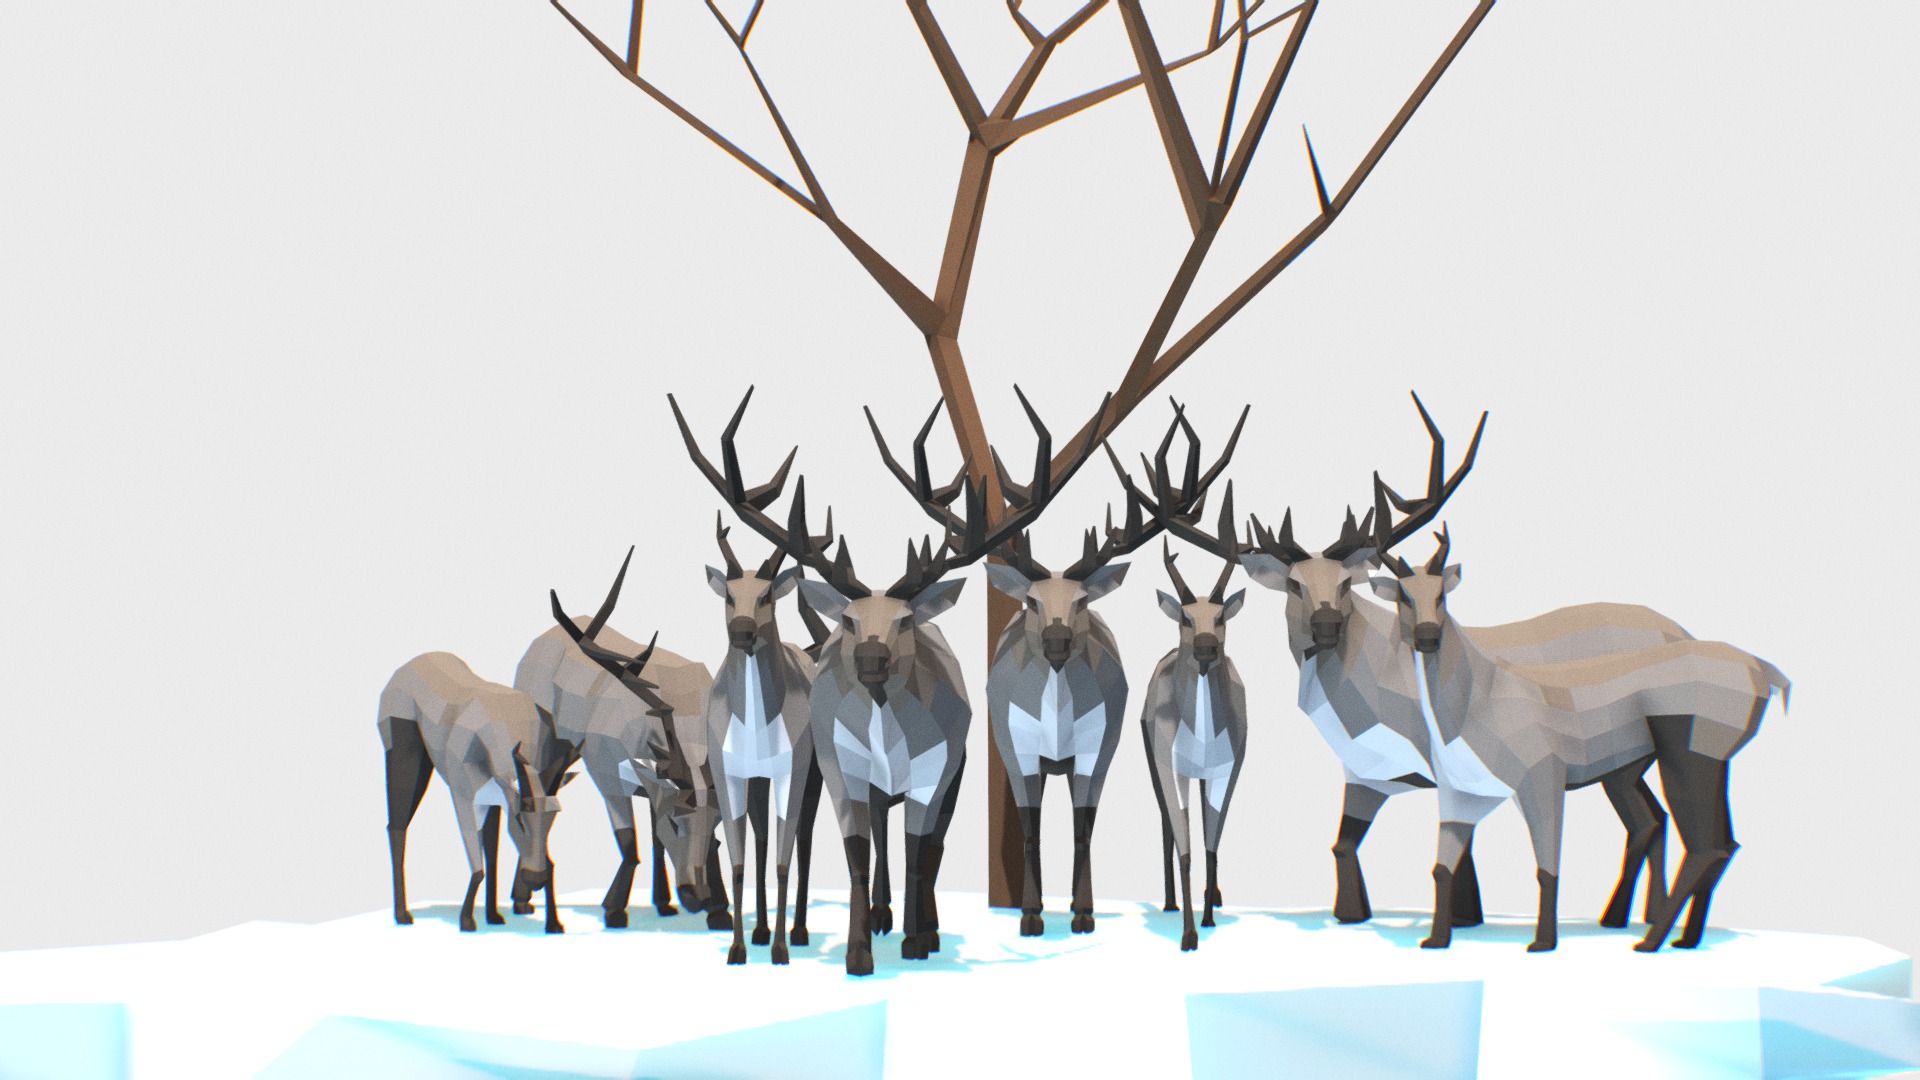 3D model Reindeers - This is a 3D model of the Reindeers. The 3D model is about a group of reindeer statues.